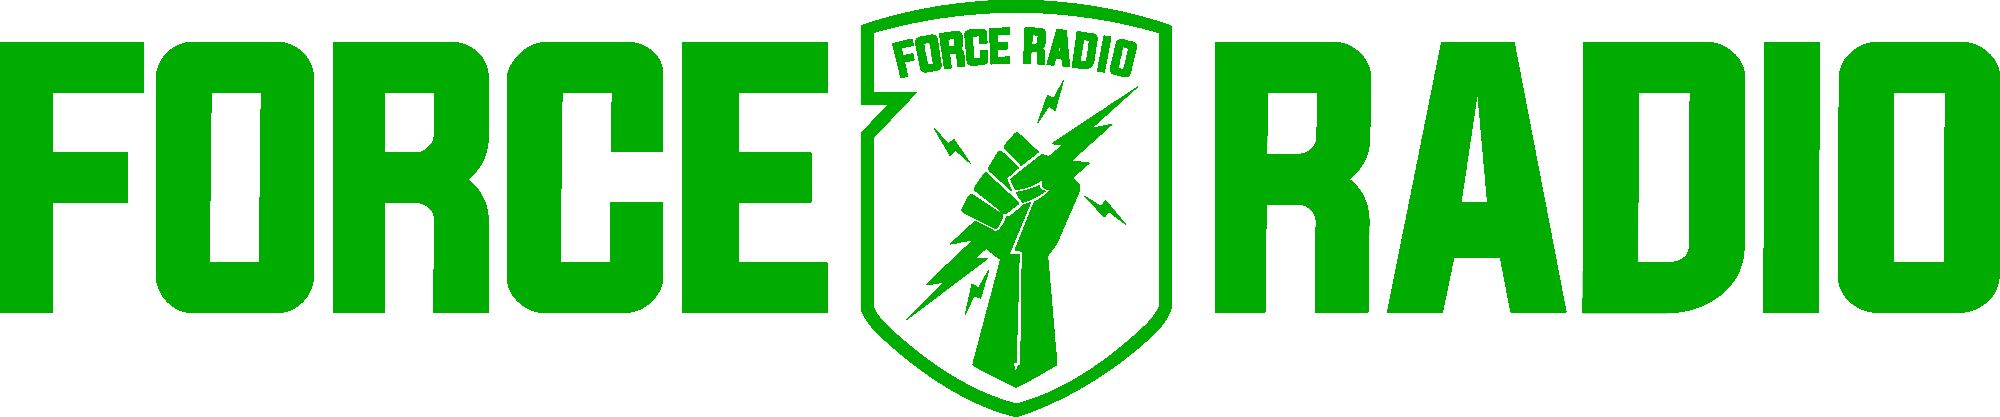 9723_Force Radio.png